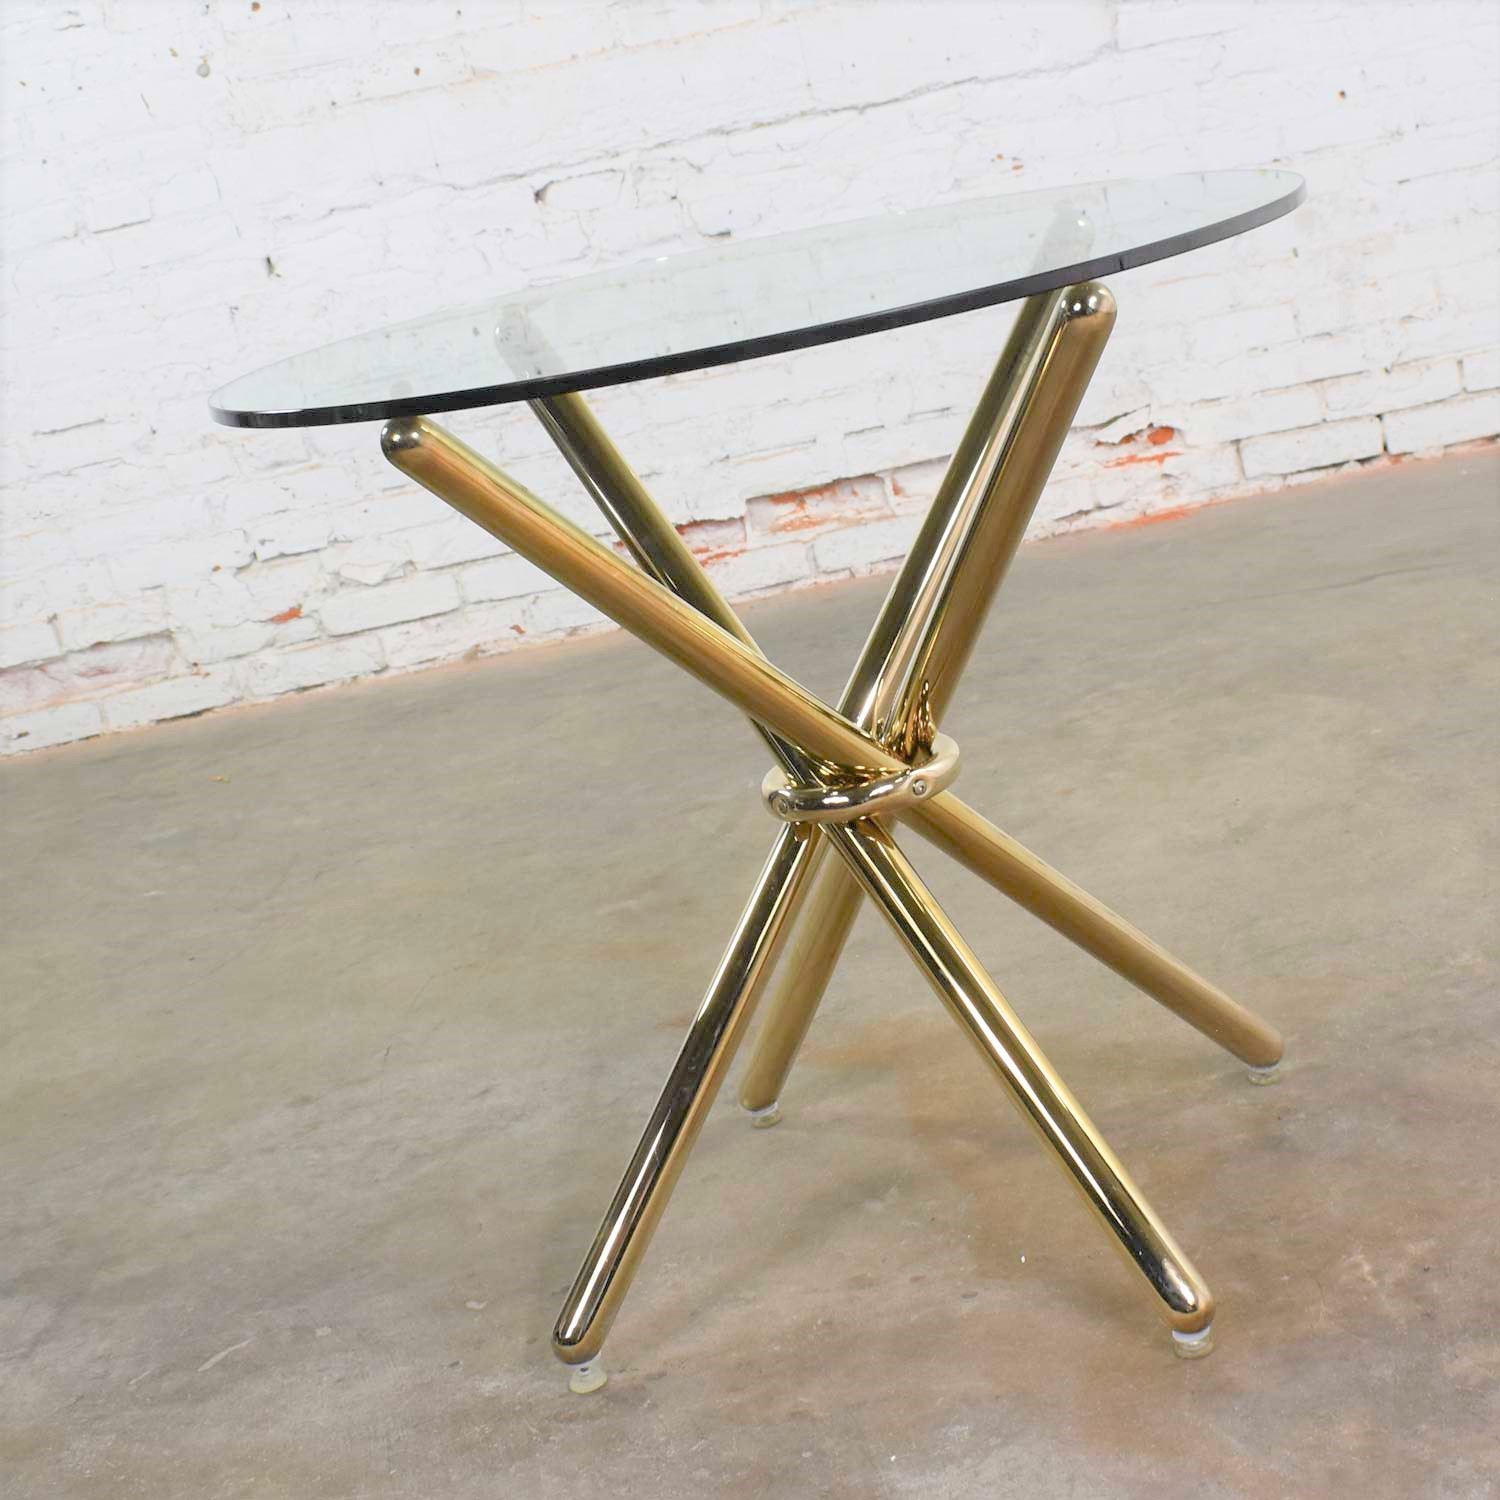 Vintage Modern Brass Plated Jax Center or End Table with Round Glass Top